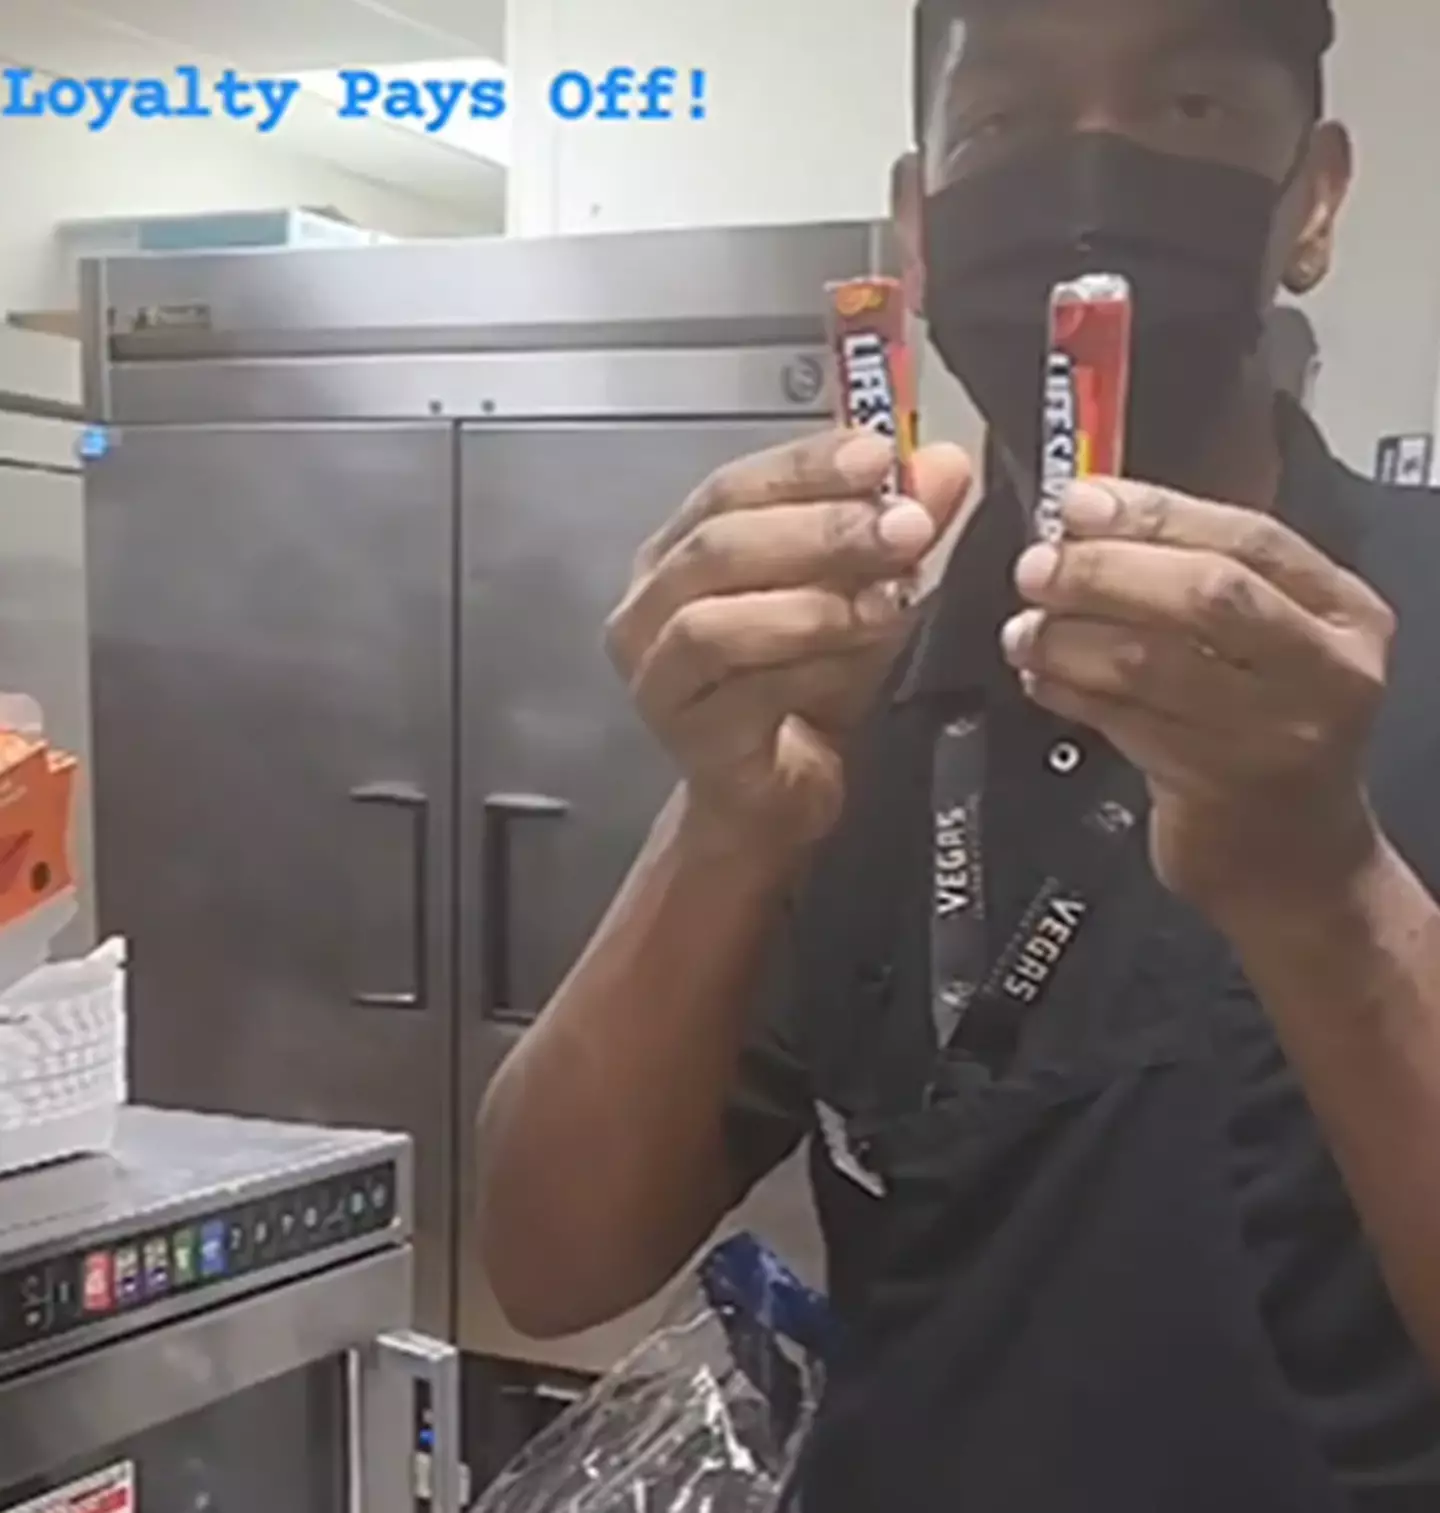 Kevin Ford was gifted just a goodie bag by Burger King after 27 years of employment.